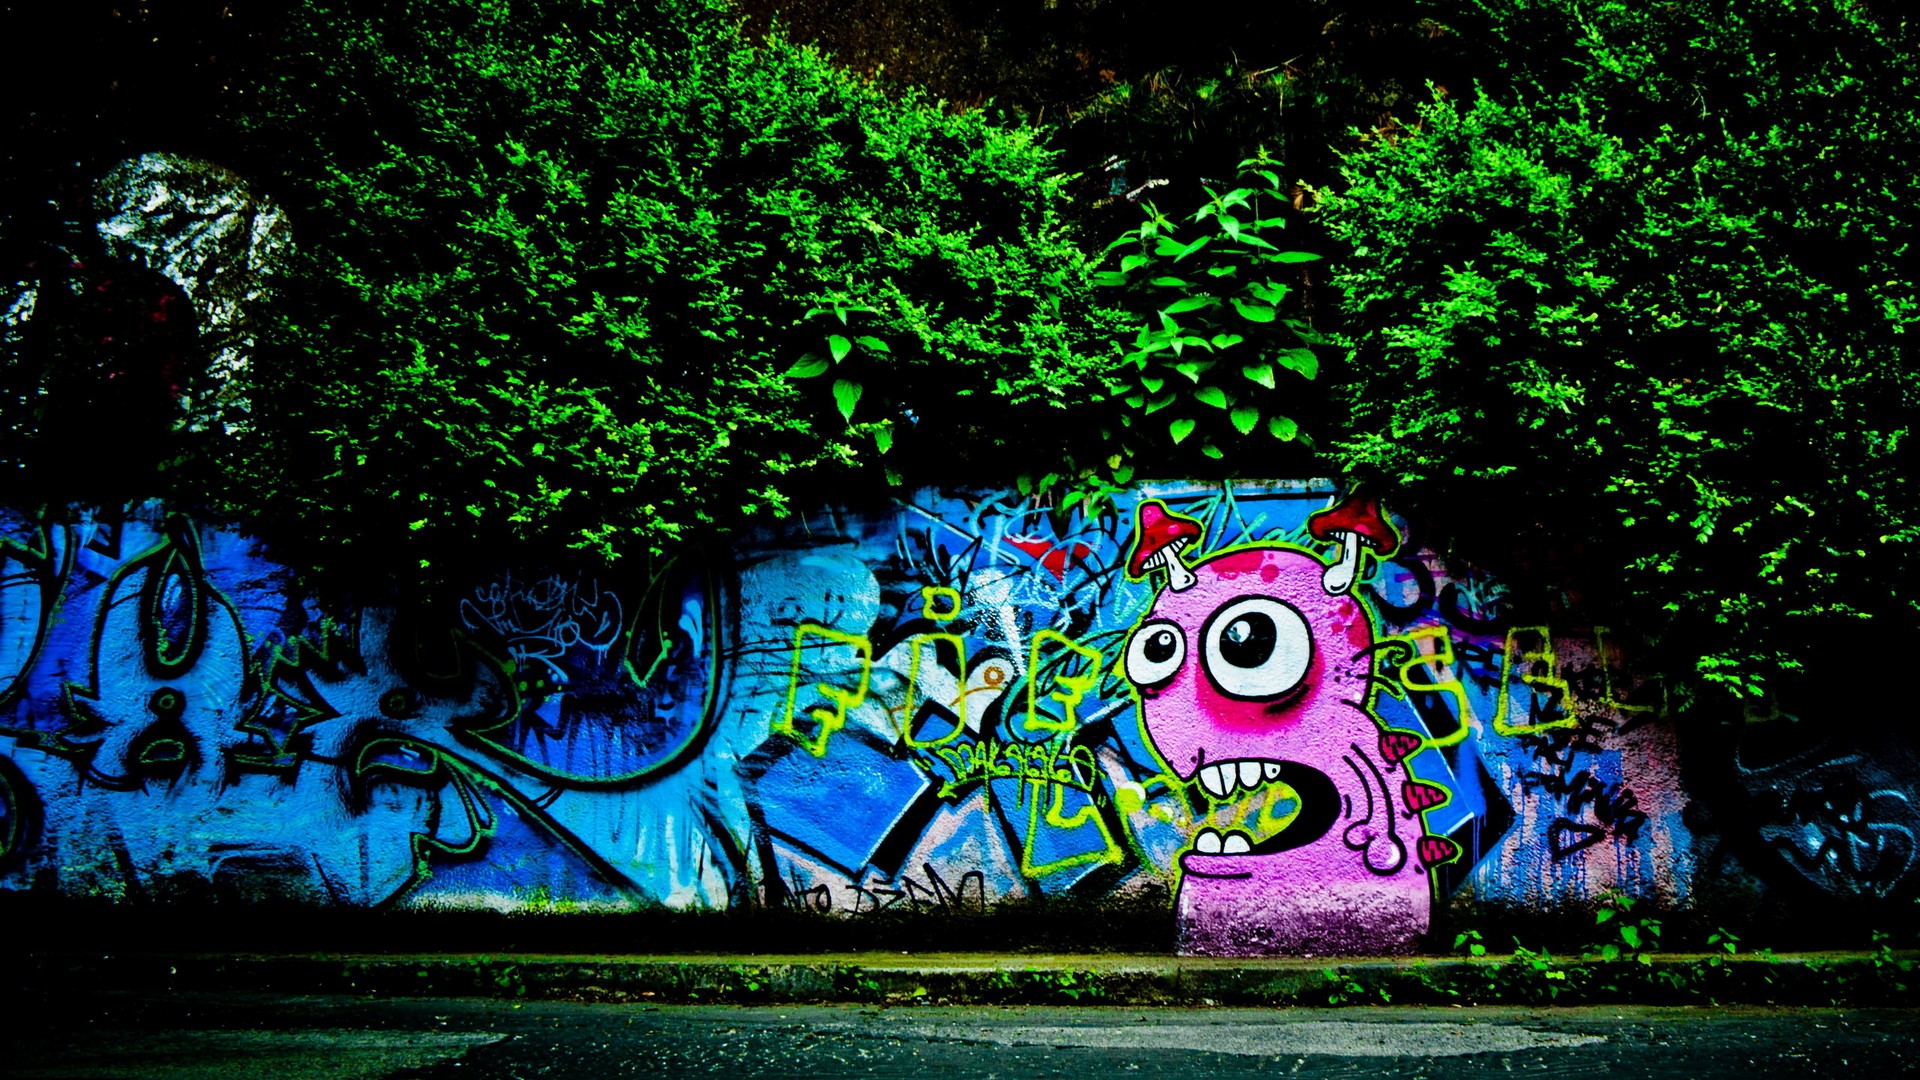 Best Graffiti Tag Wallpaper HD with image resolution 1920x1080 pixel. You can make this wallpaper for your Desktop Computer Backgrounds, Mac Wallpapers, Android Lock screen or iPhone Screensavers